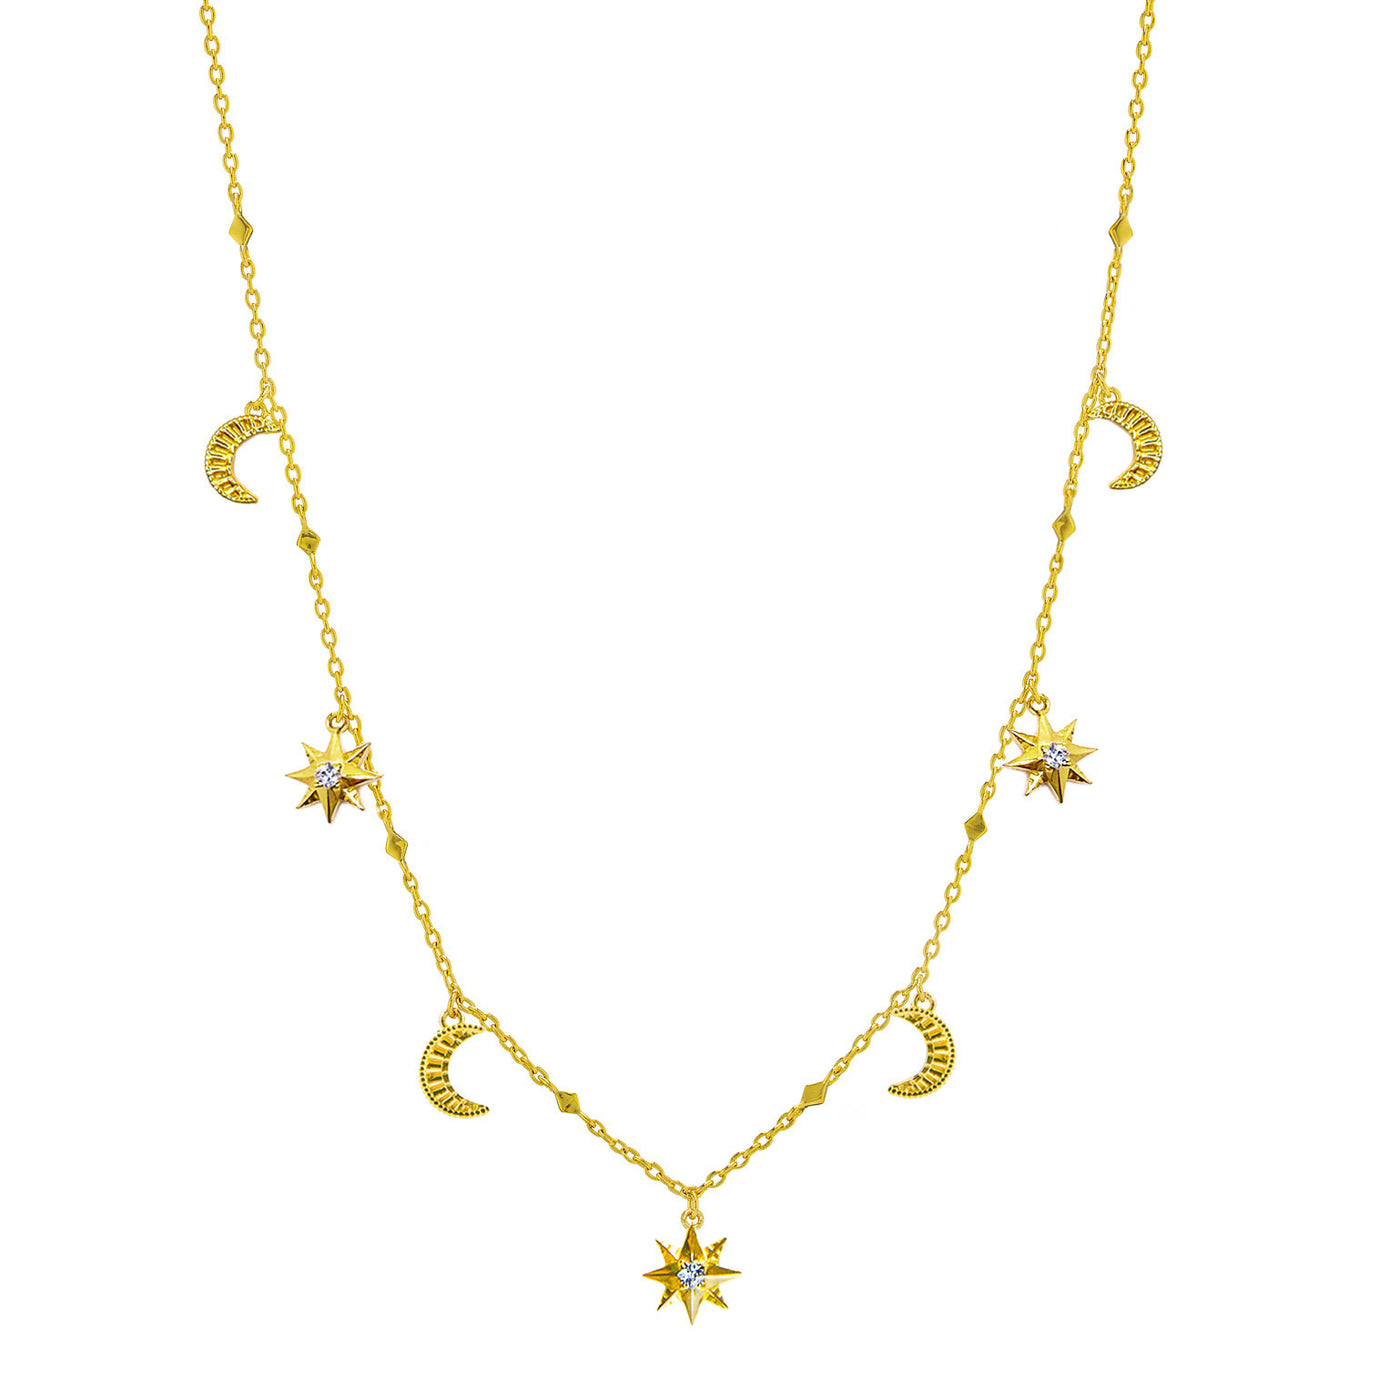 Gold moon and star choker necklace with CZ crystals